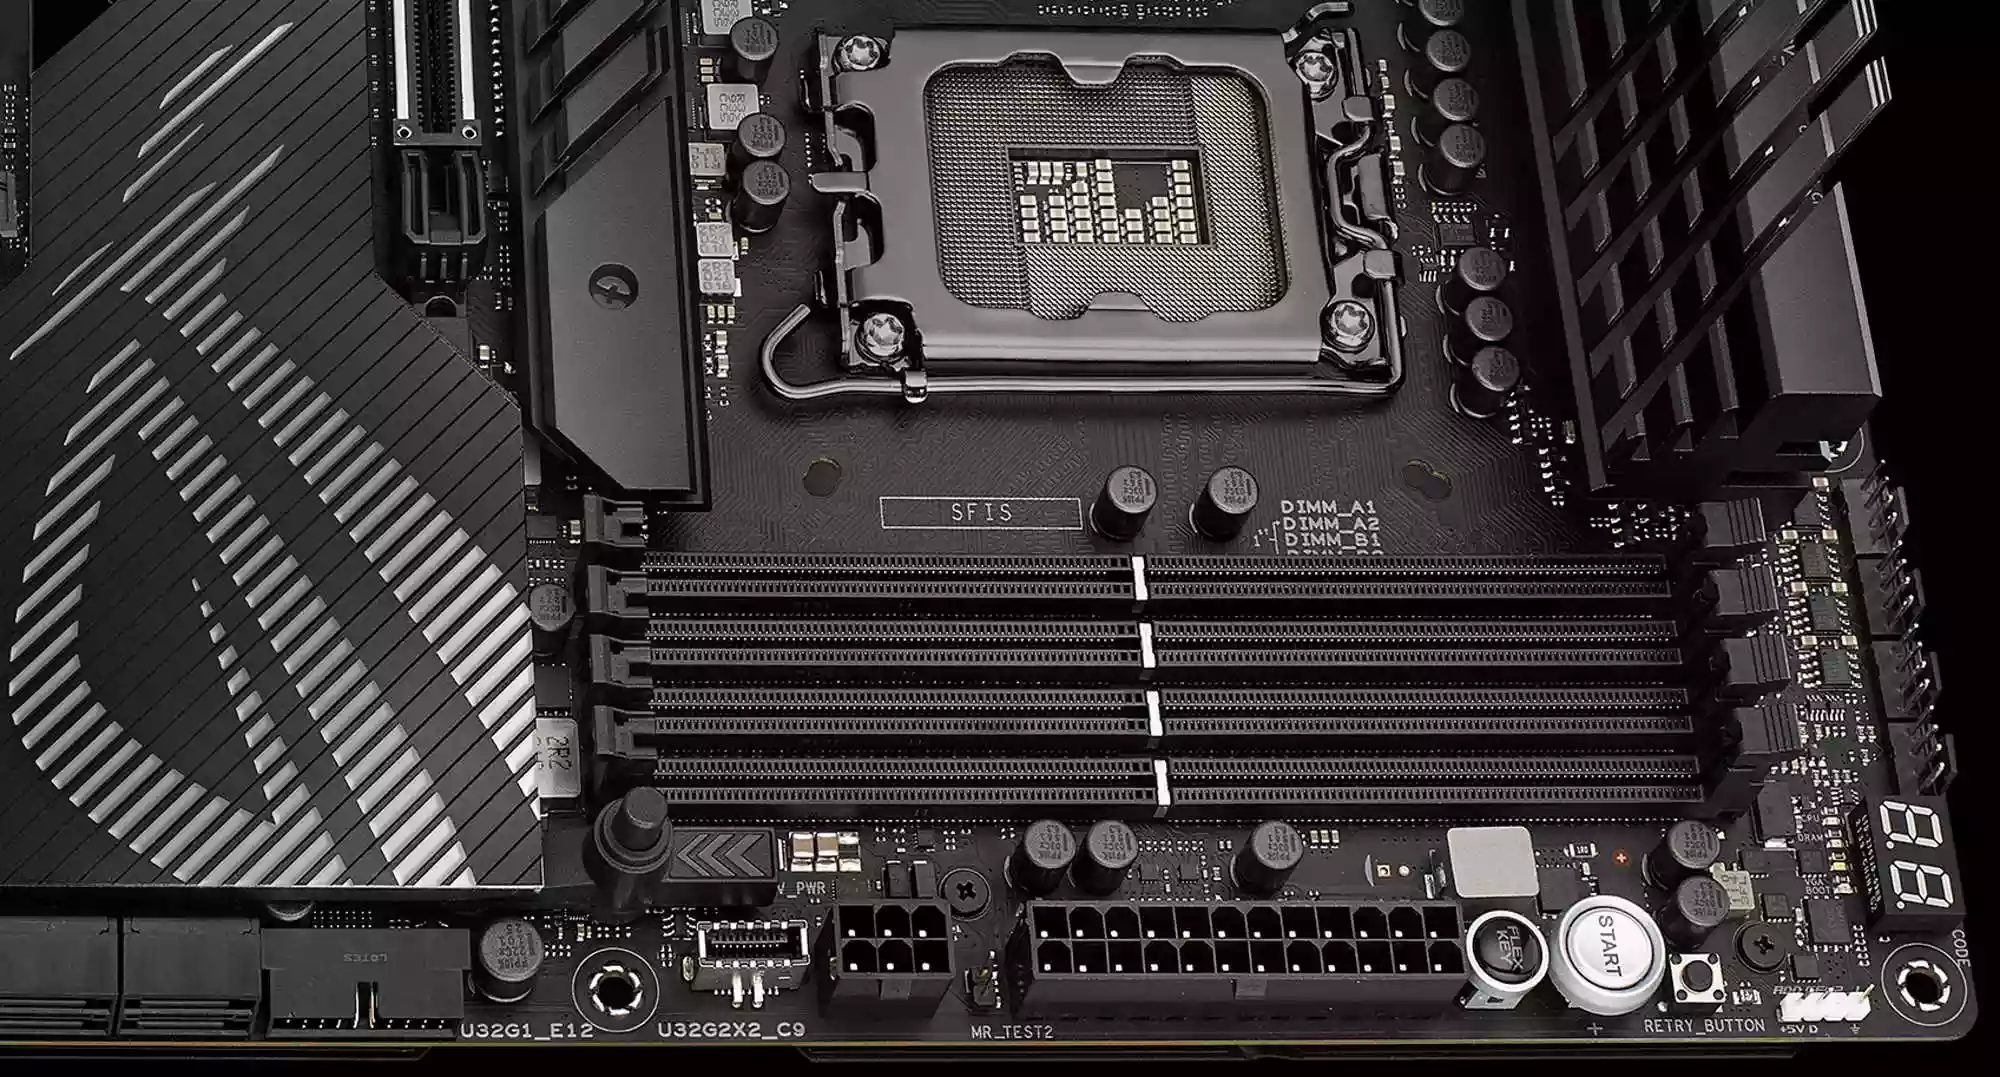 DRAM slots on the ROG Maximus Z790 Extreme motherboard